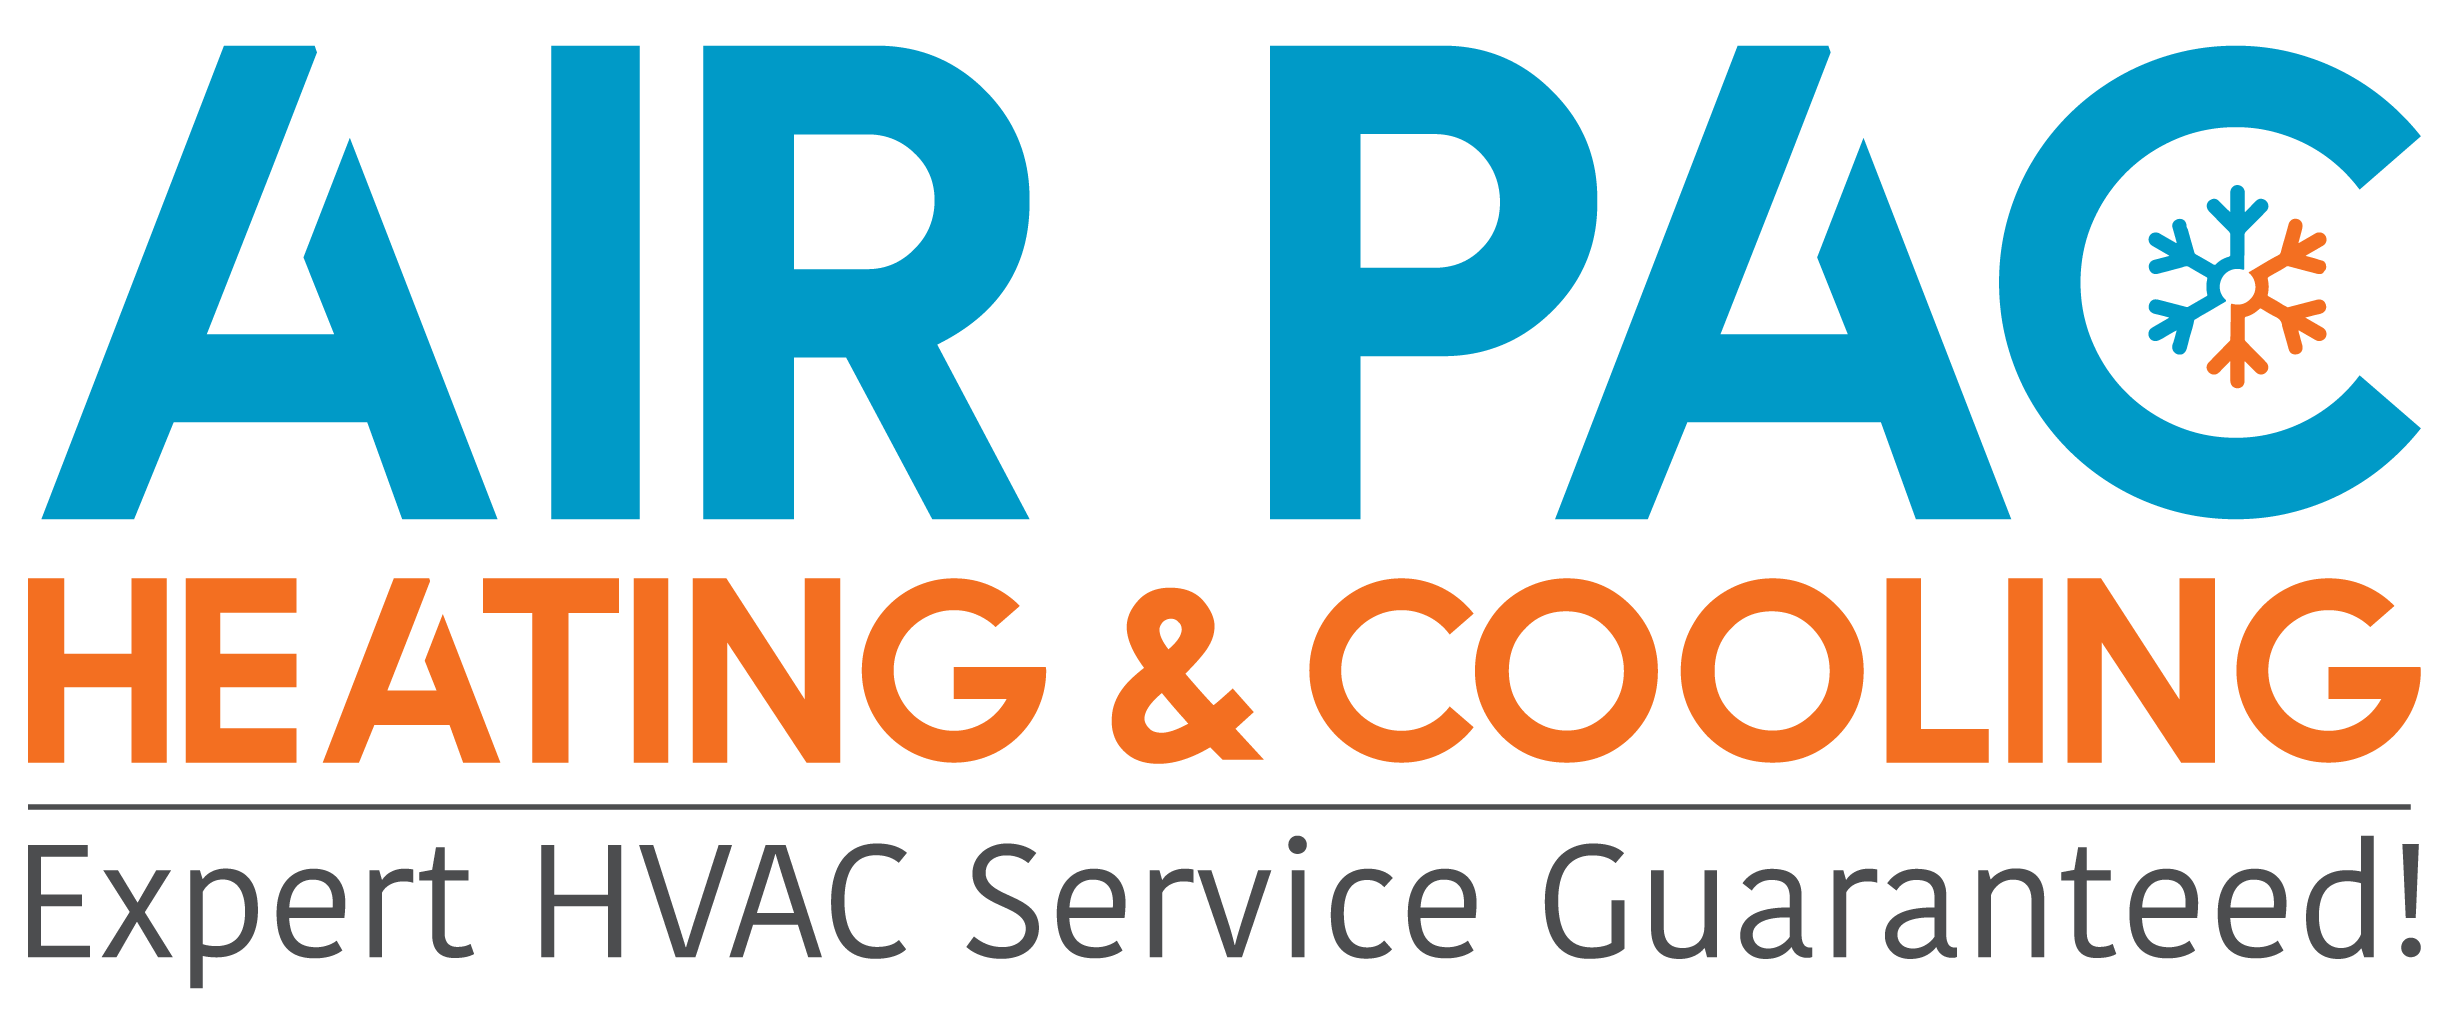 AIR PAC Heating & Cooling | The Best HVAC Company in Richmond Hill, Toronto & GTA